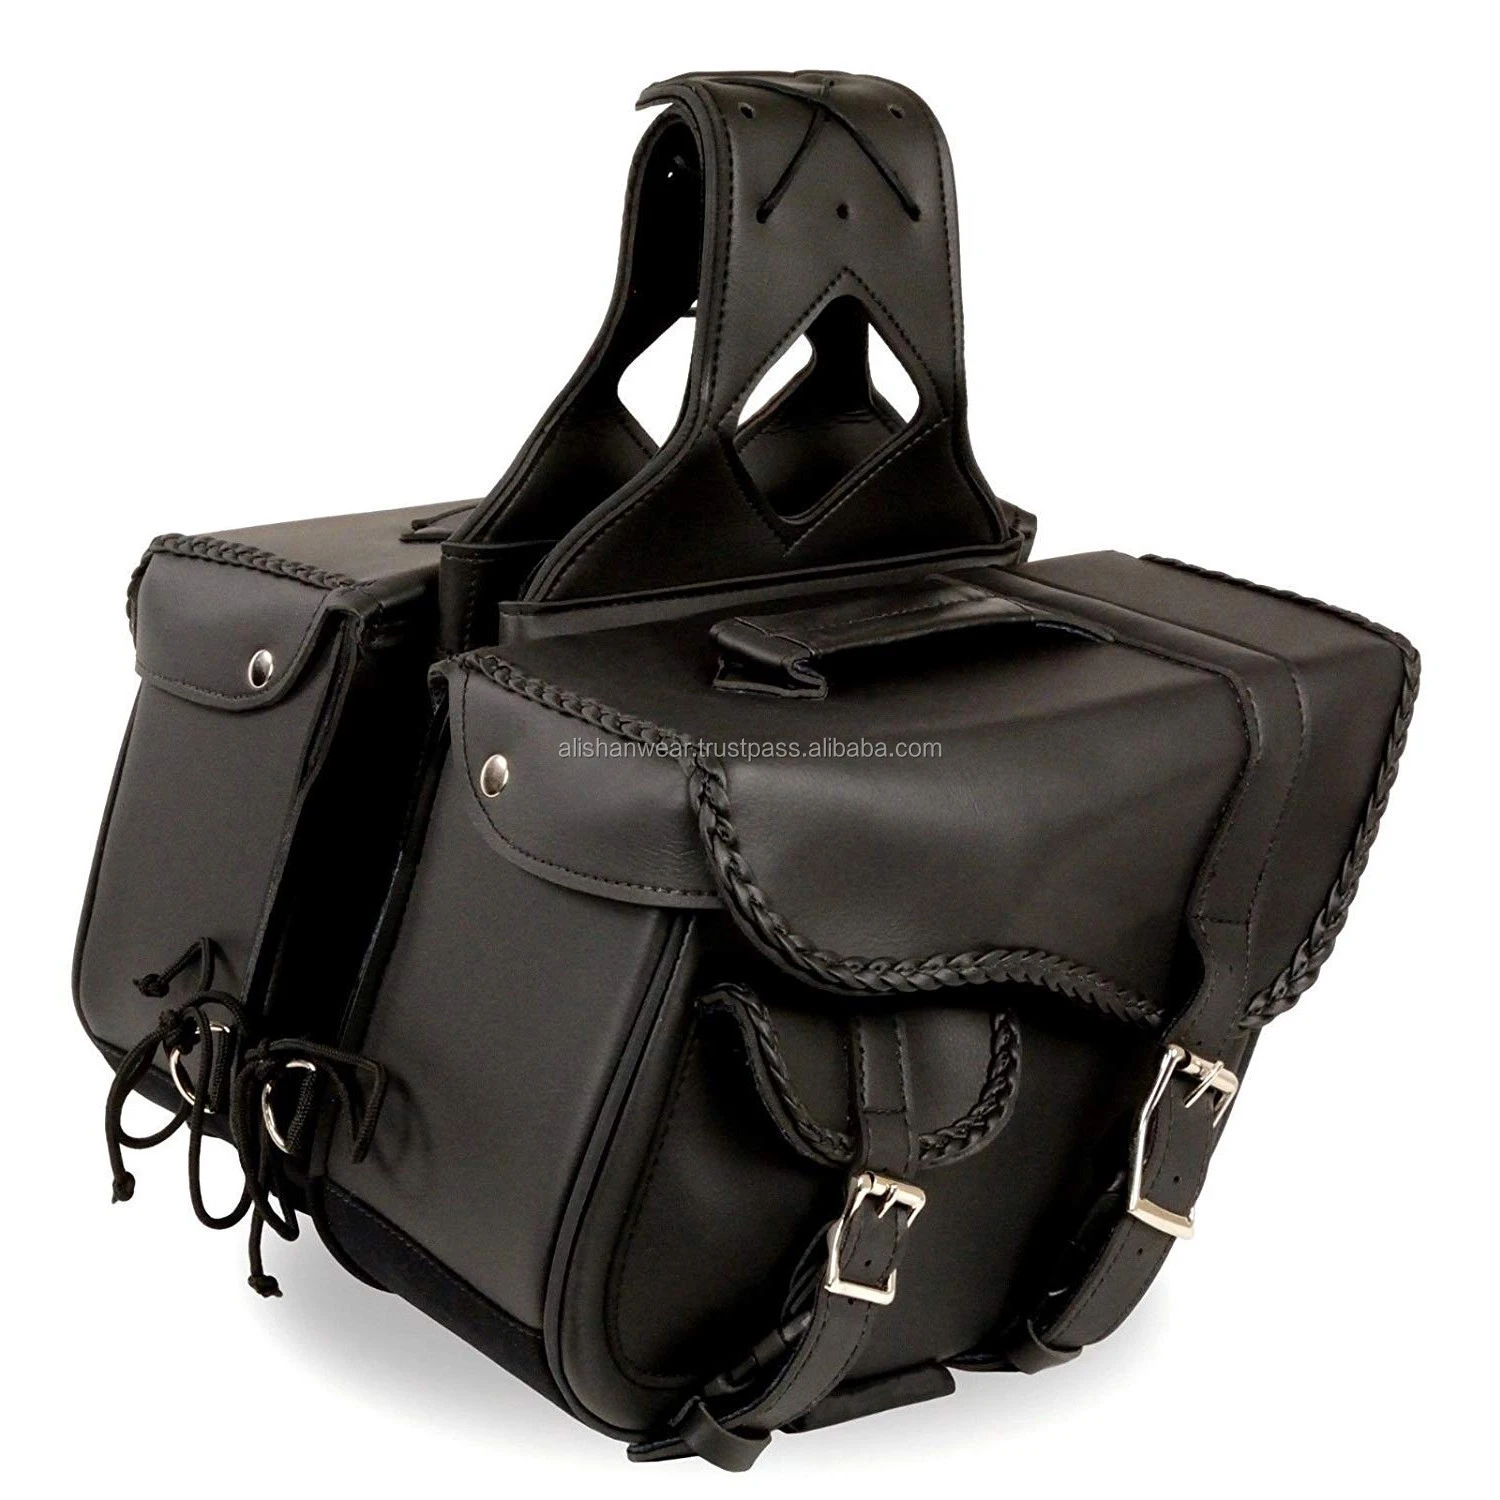 New Design Motorcycle Bags Fashion Bicycle Hard PU Leather Saddle Bags Waterproof Side Bag